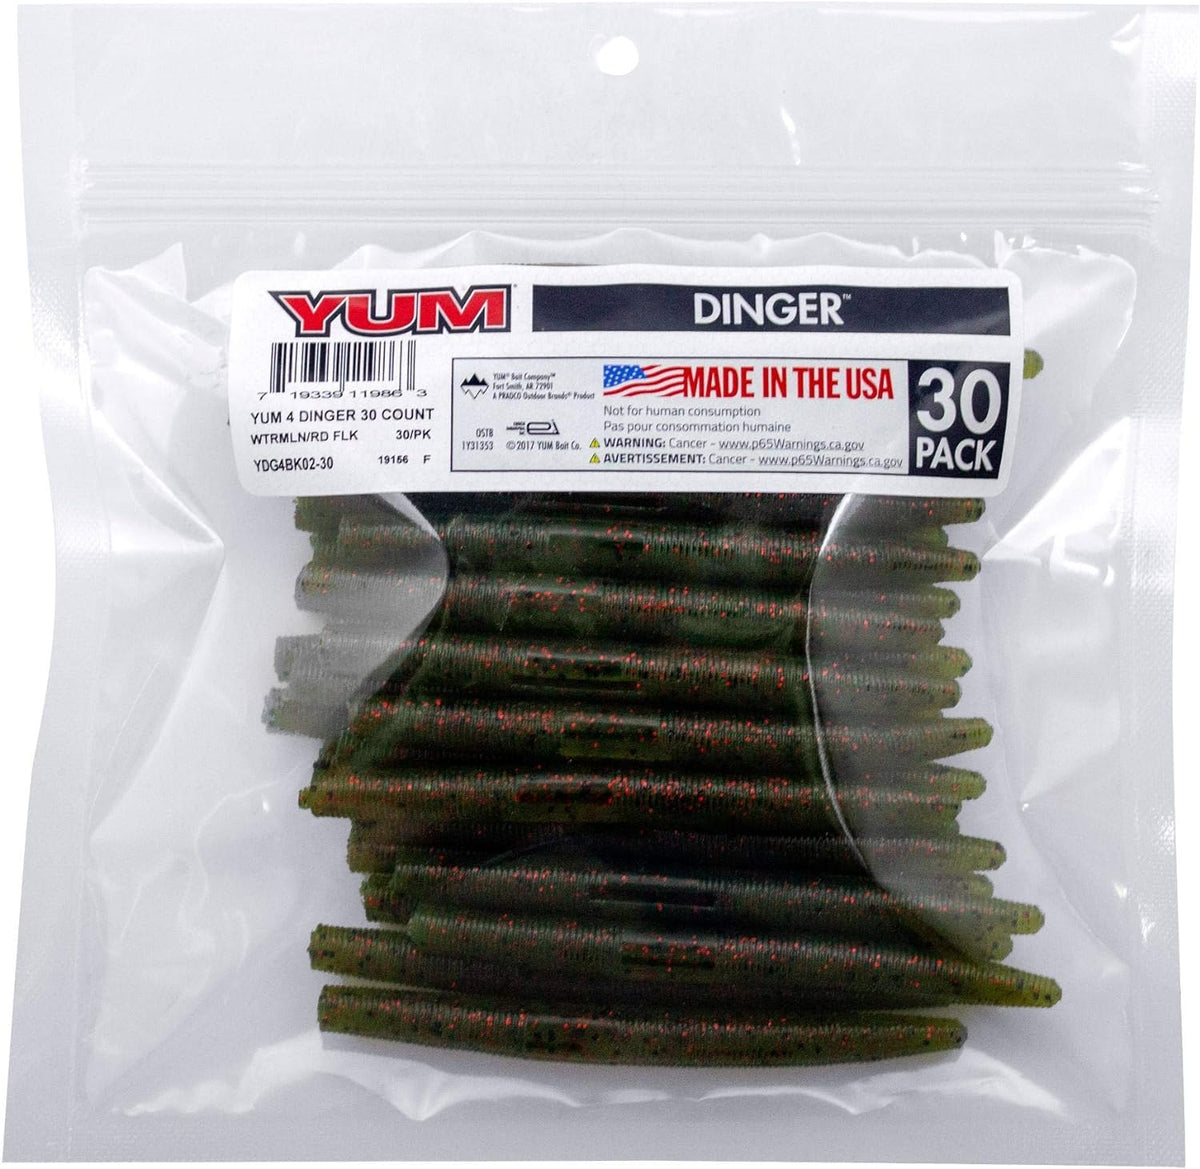 Yum - Dinger 4 inch 30 pack – Knight's Necessities